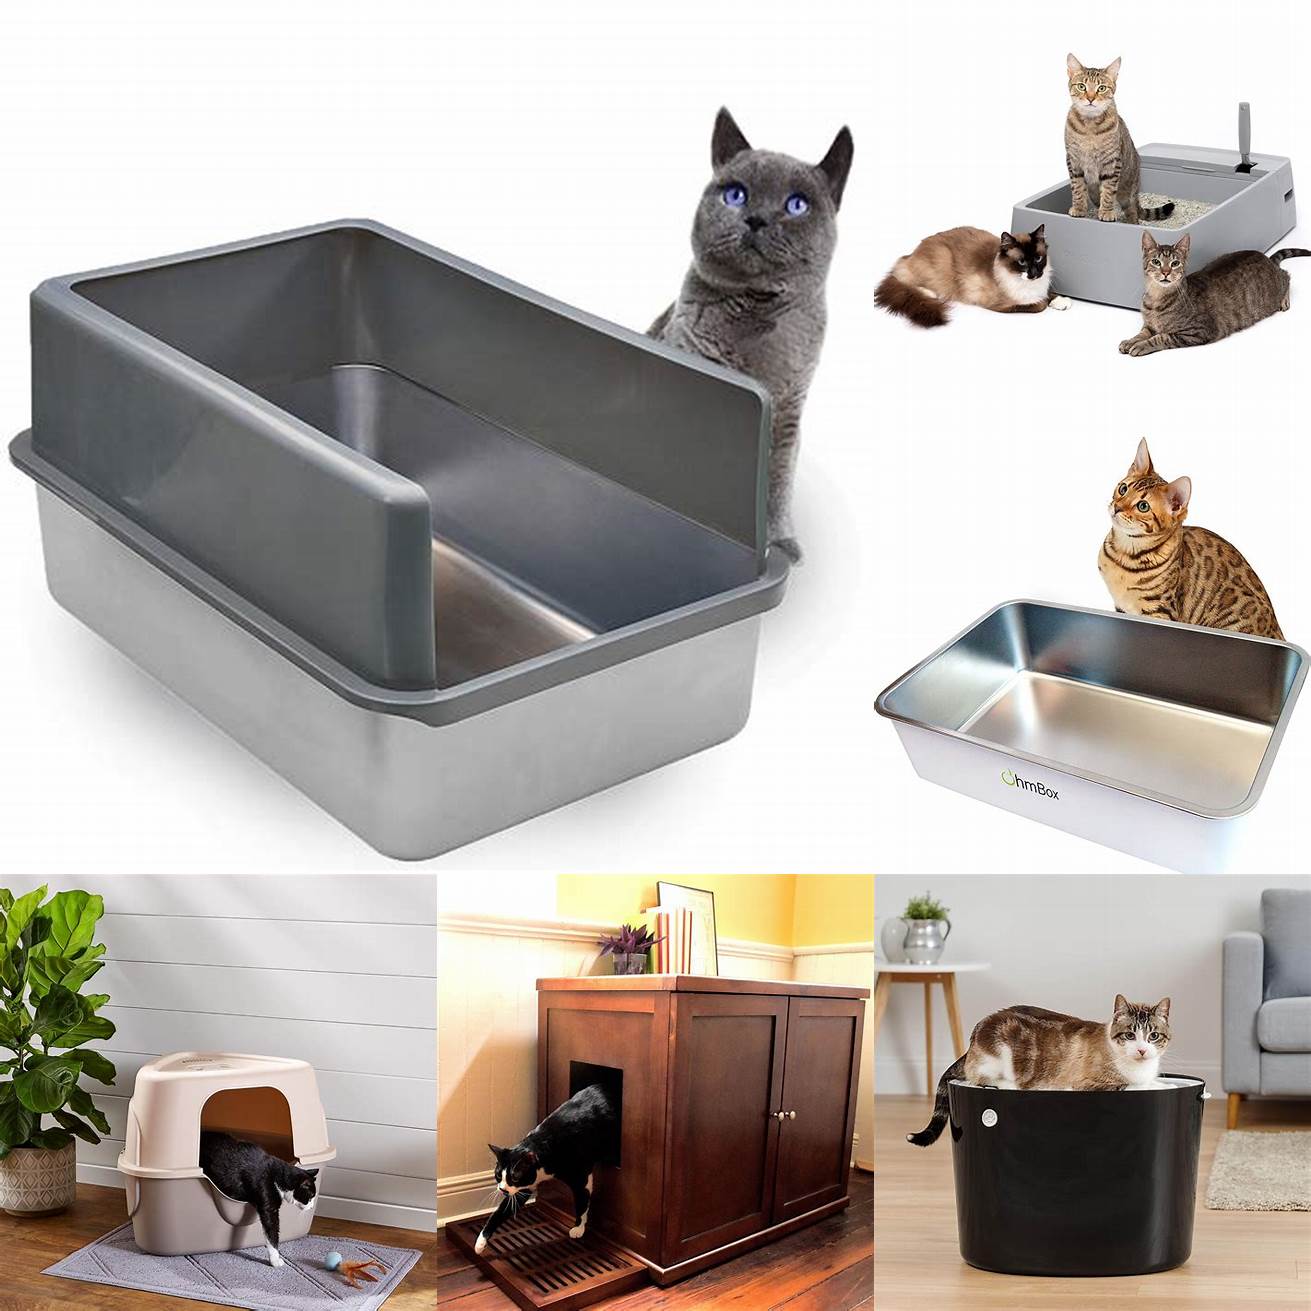 Material Litter boxes come in various materials such as plastic metal and wood